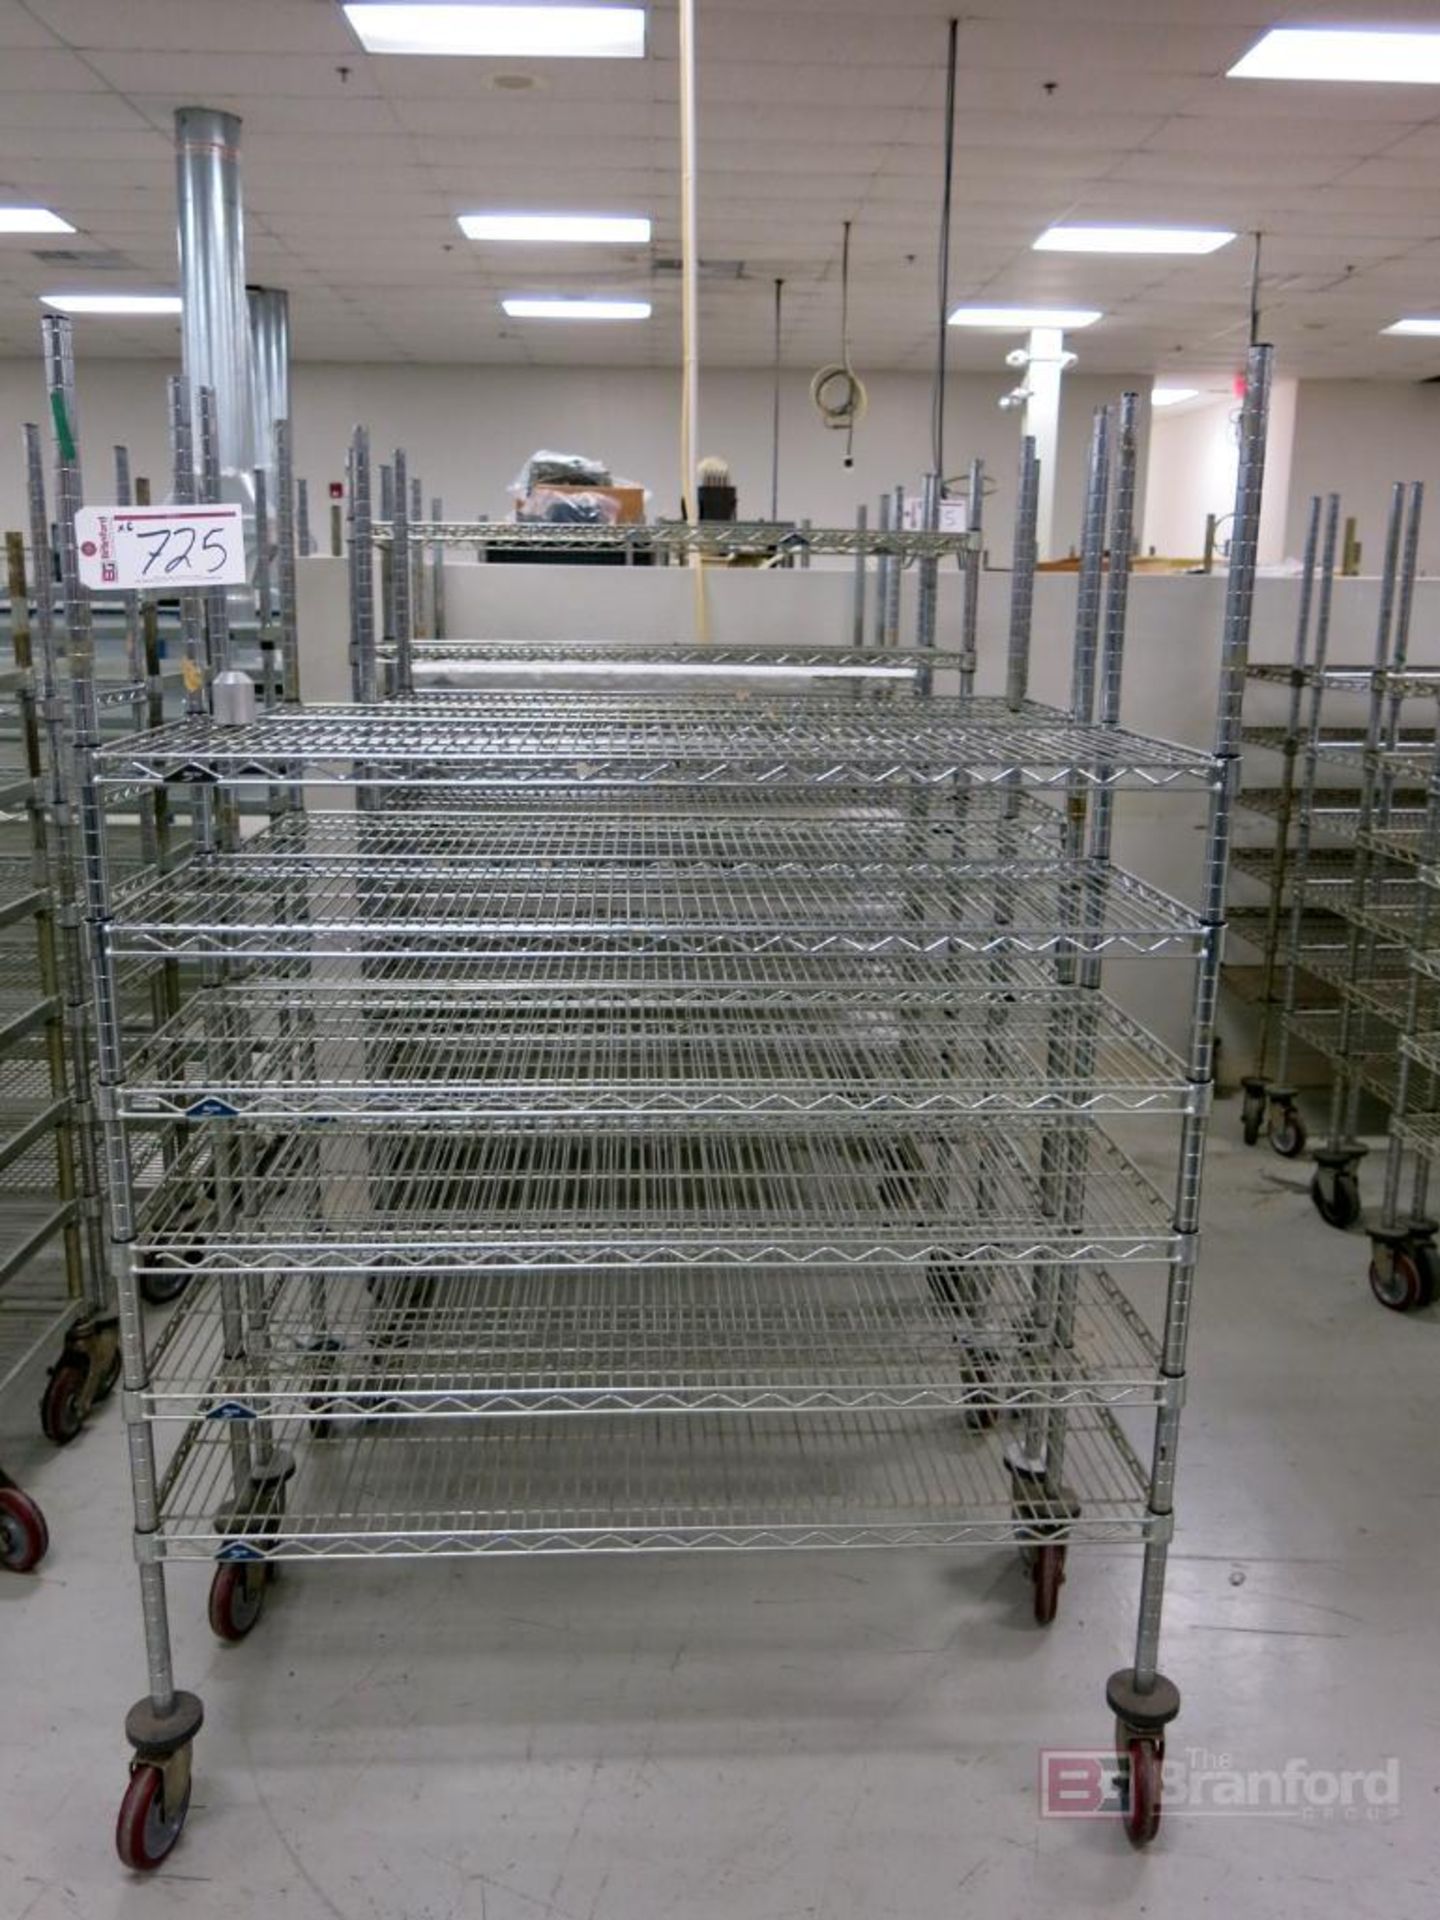 (6) Metro Style Wire Shelf Castered Shelving Units